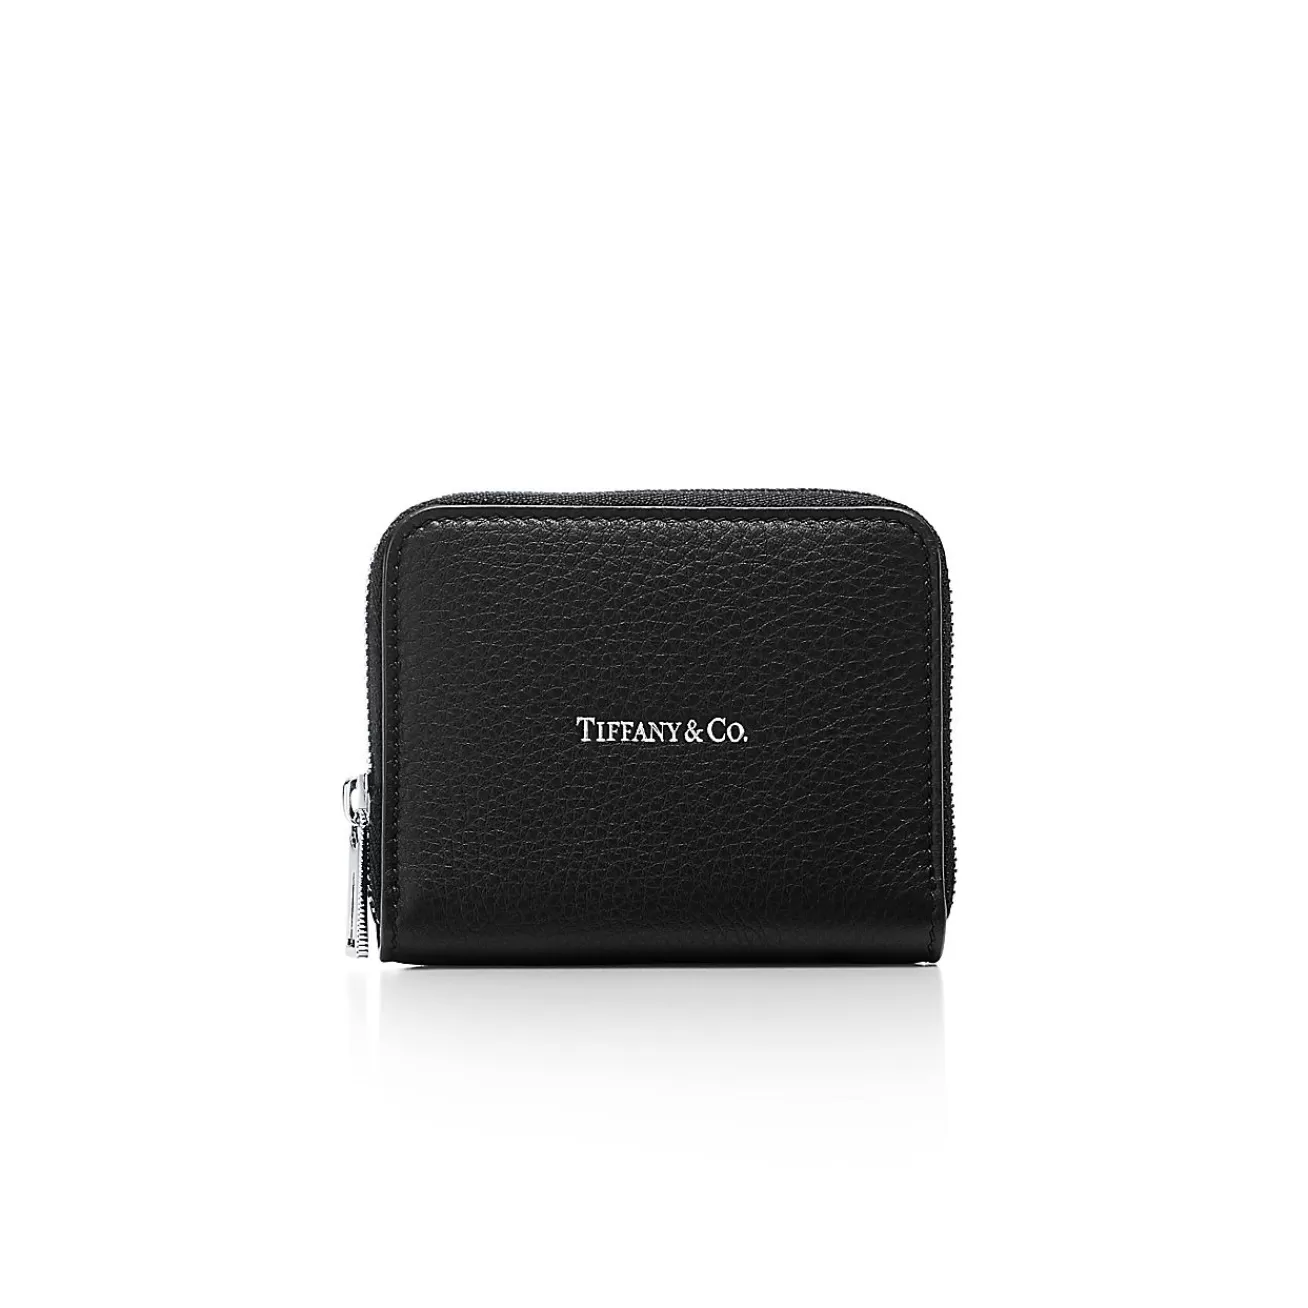 Tiffany & Co. Zip Coin Pouch in Black Leather | ^ Small Leather Goods | Women's Accessories